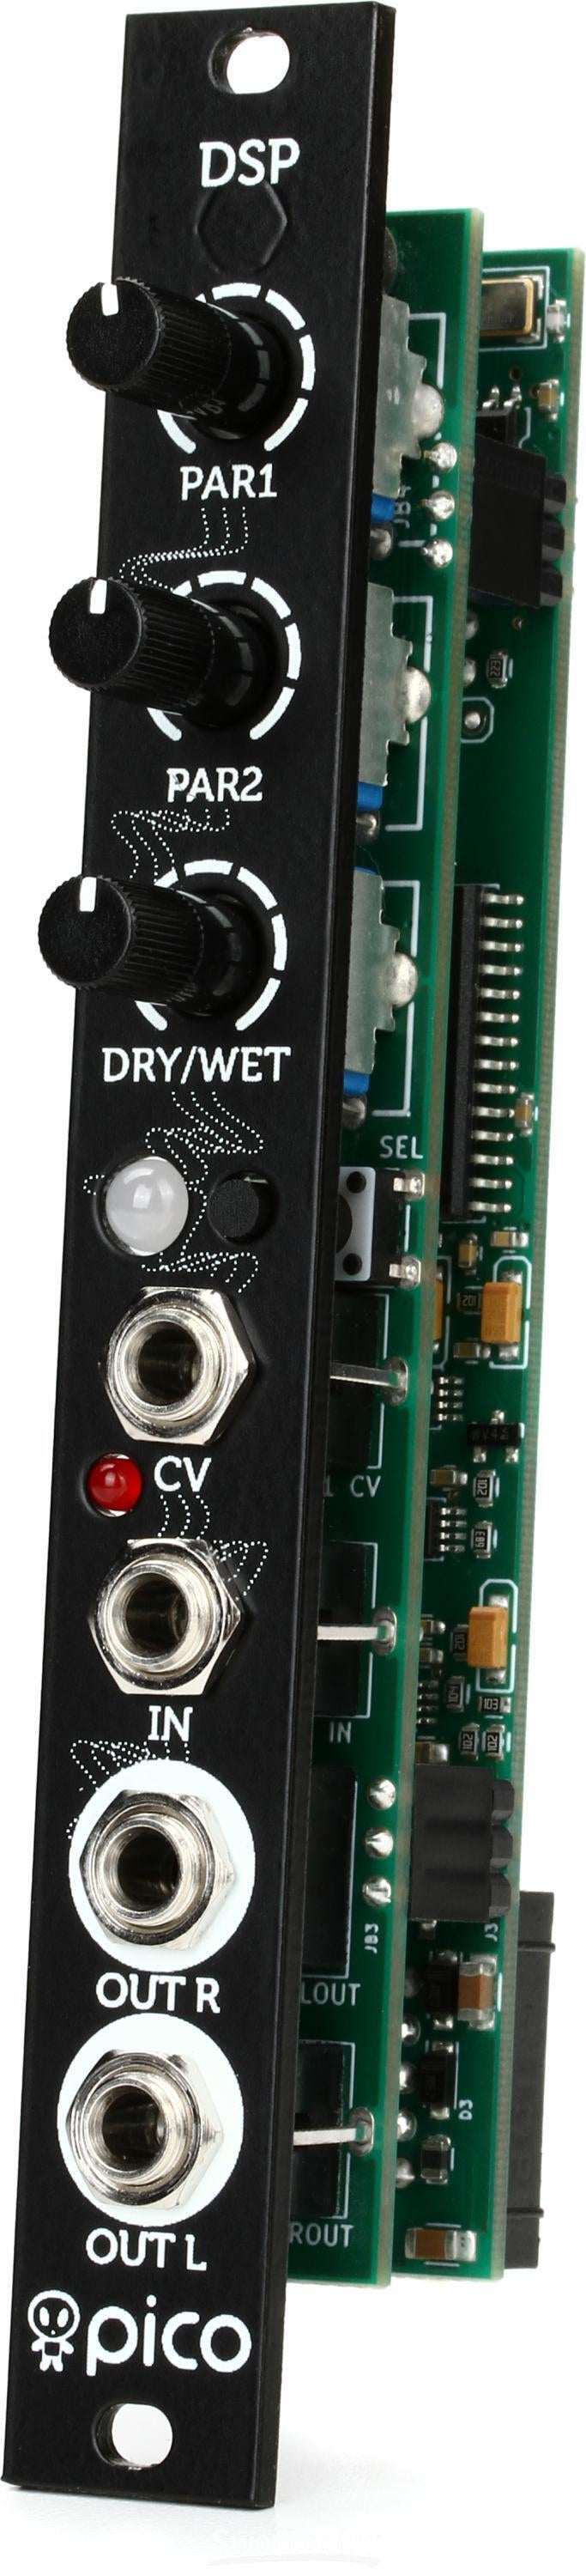 Pico DSP Stereo Effects Eurorack Module - Sweetwater